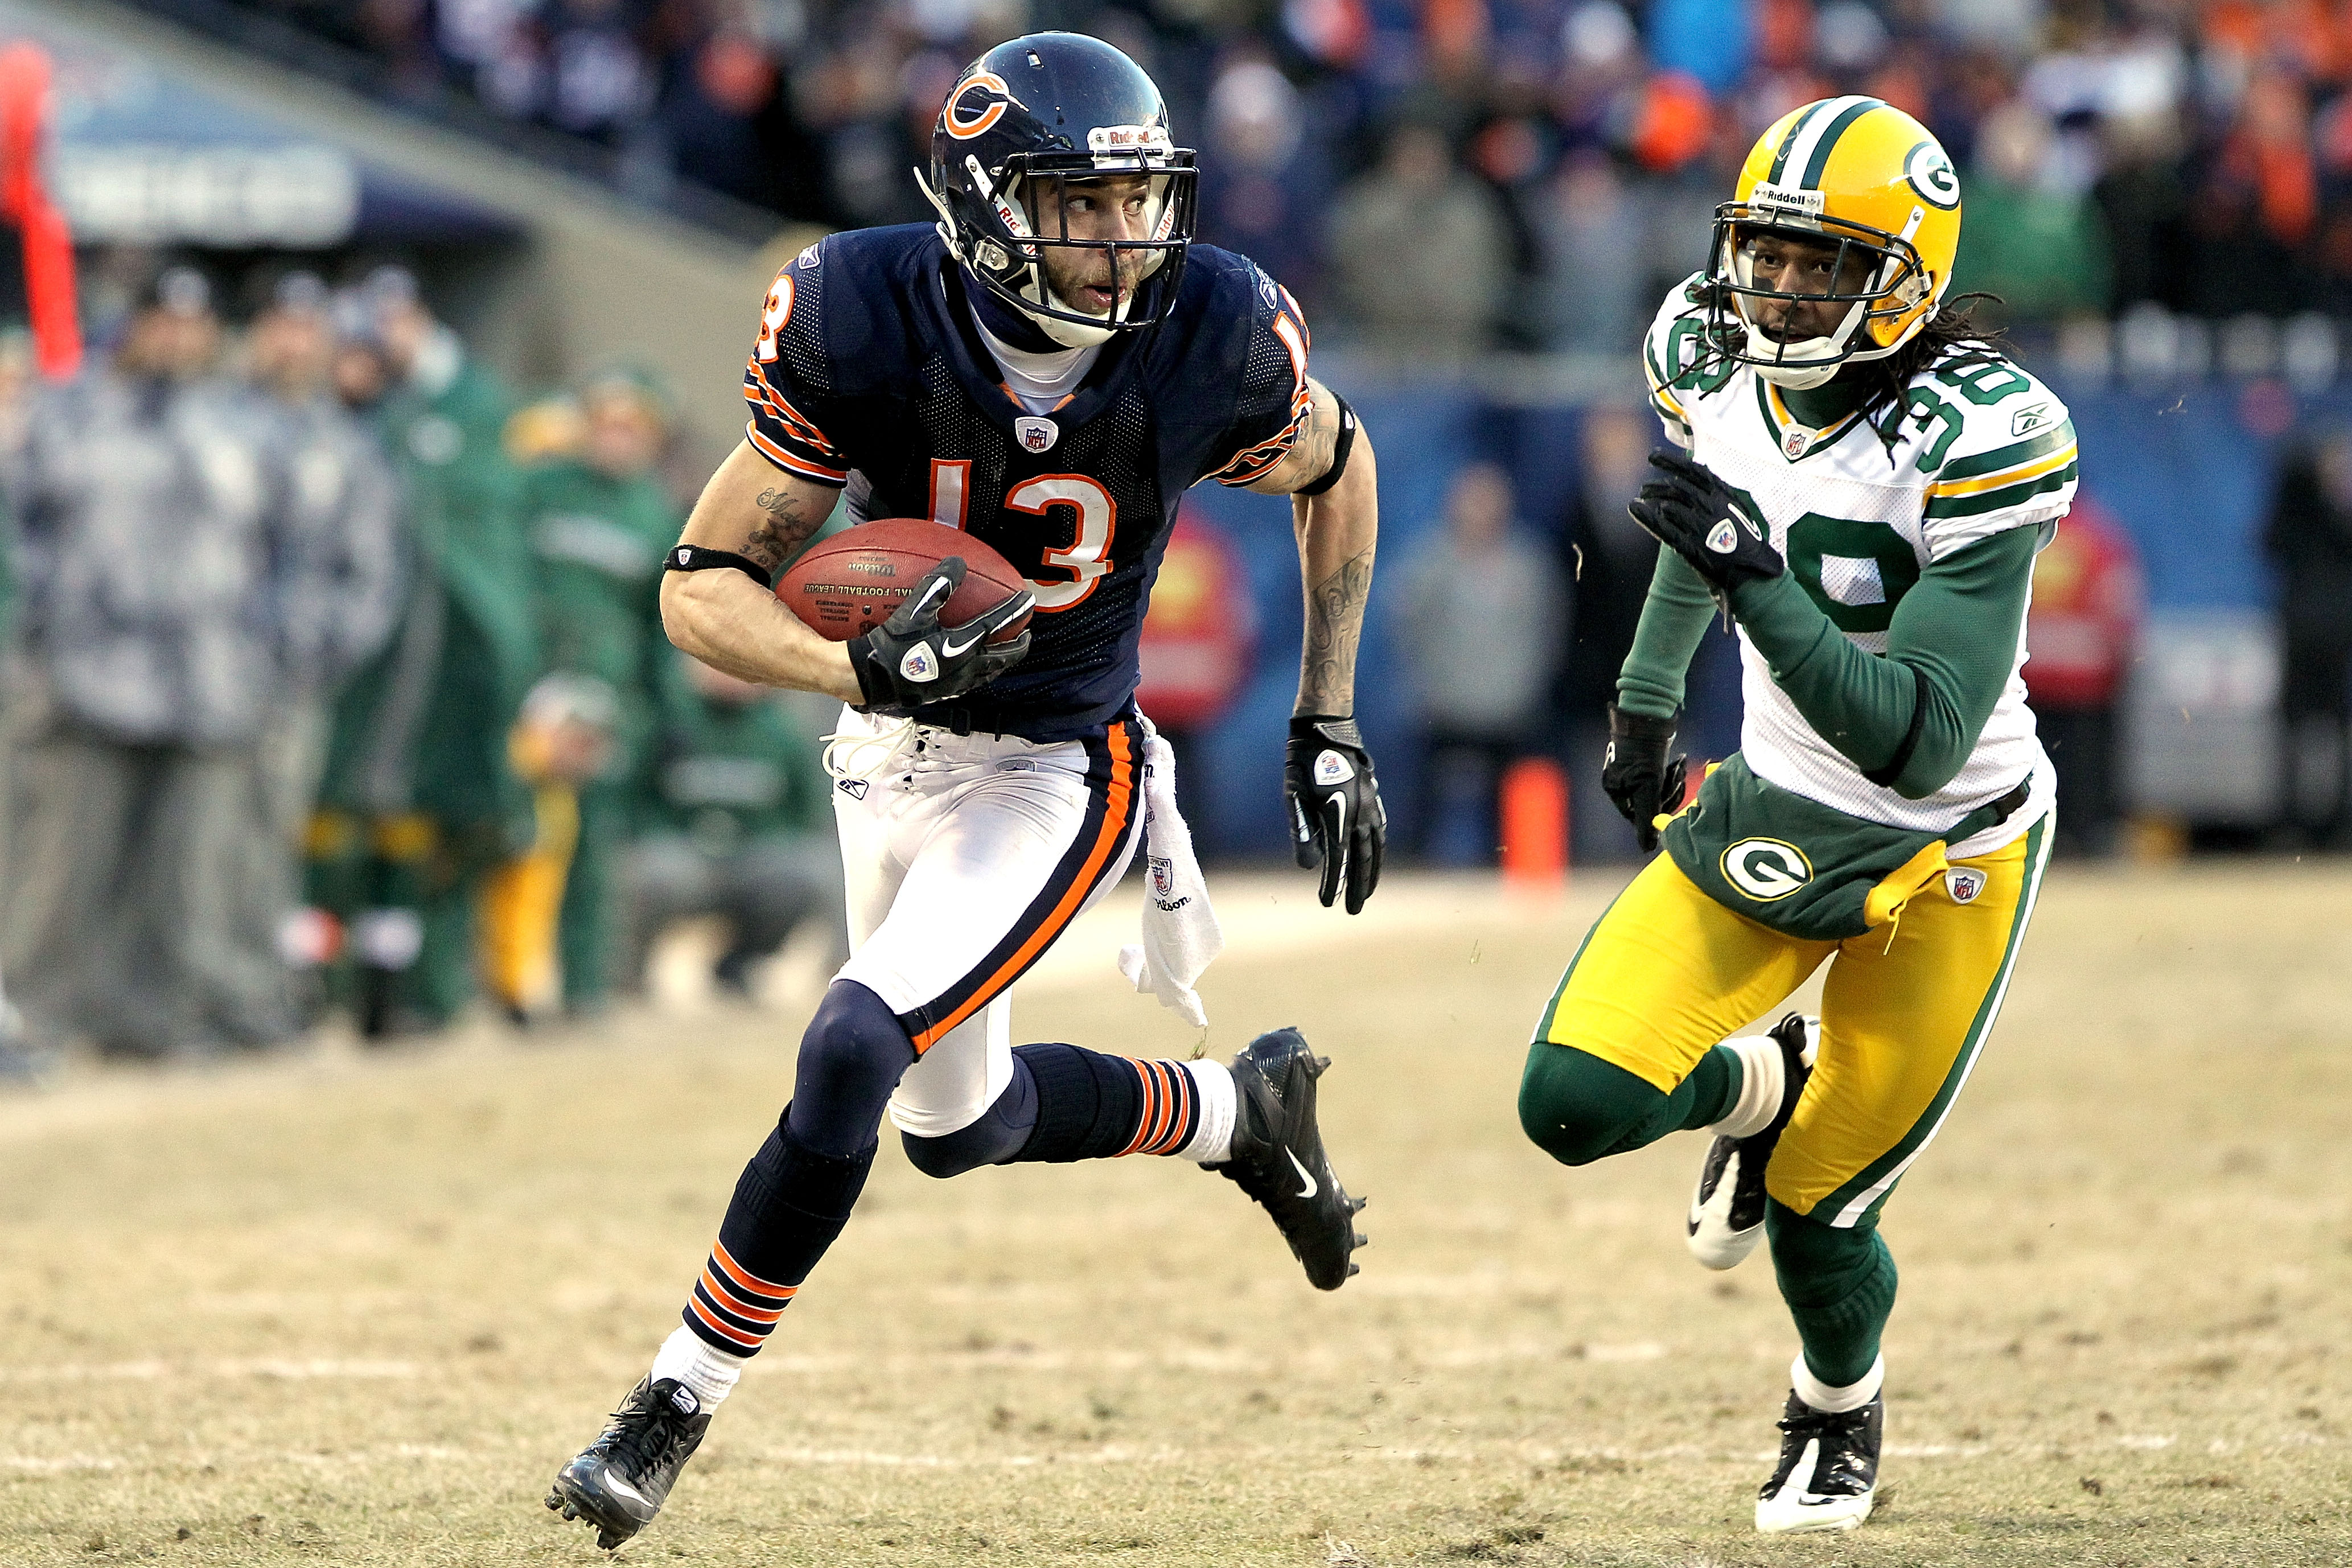 CHICAGO, IL - JANUARY 23:  Johnny Knox #13 of the Chicago Bears runs ahead of Tramon Williams #38 of the Green Bay Packers for a 32-yard gain in the fourth quarter in the NFC Championship Game at Soldier Field on January 23, 2011 in Chicago, Illinois.  (P